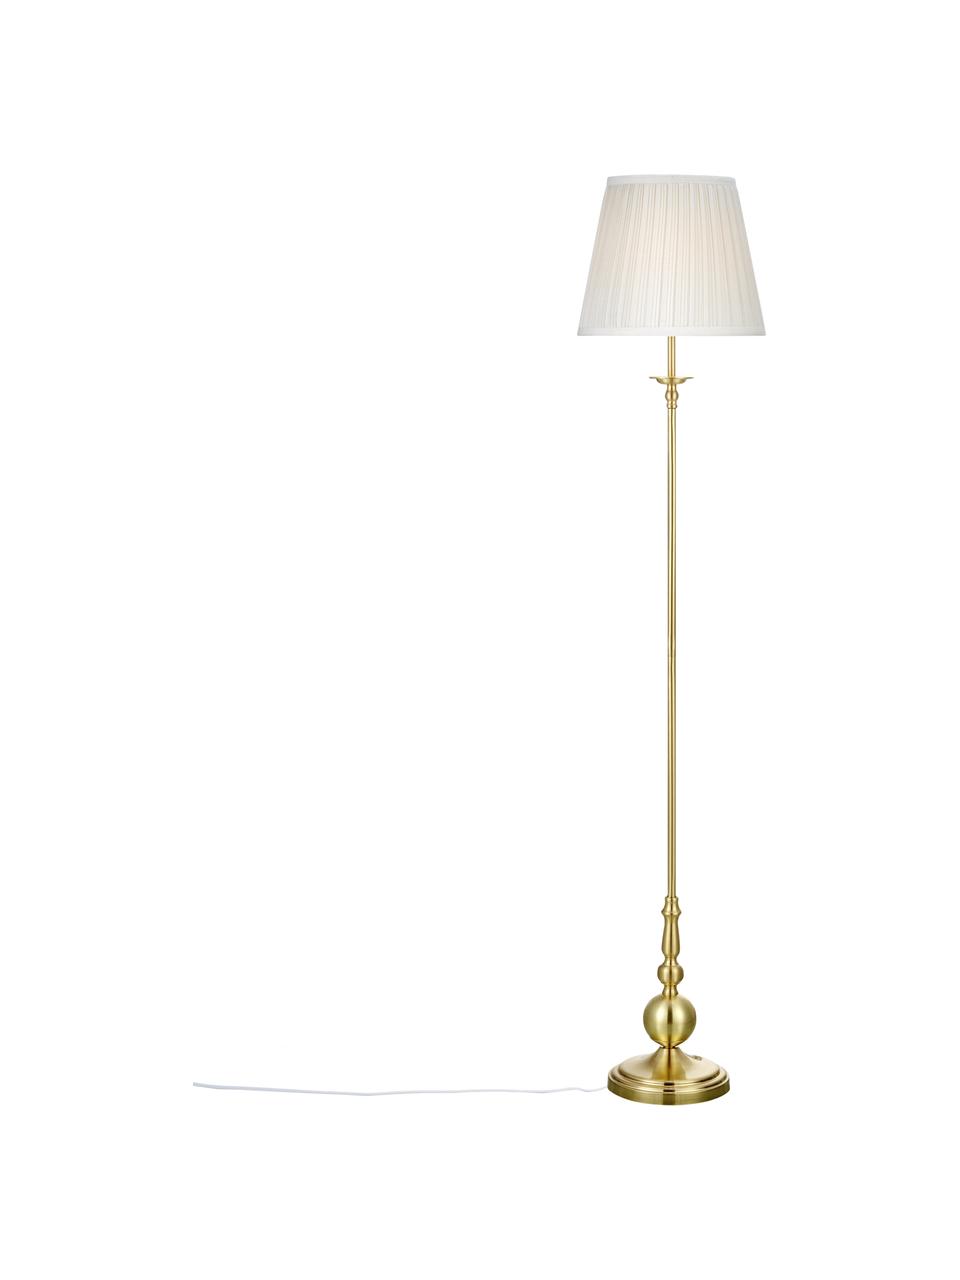 Stehlampe Imperia in Messing, Lampenschirm: Polyester, Weiss, Messingfarben, Ø 30 x H 149 cm